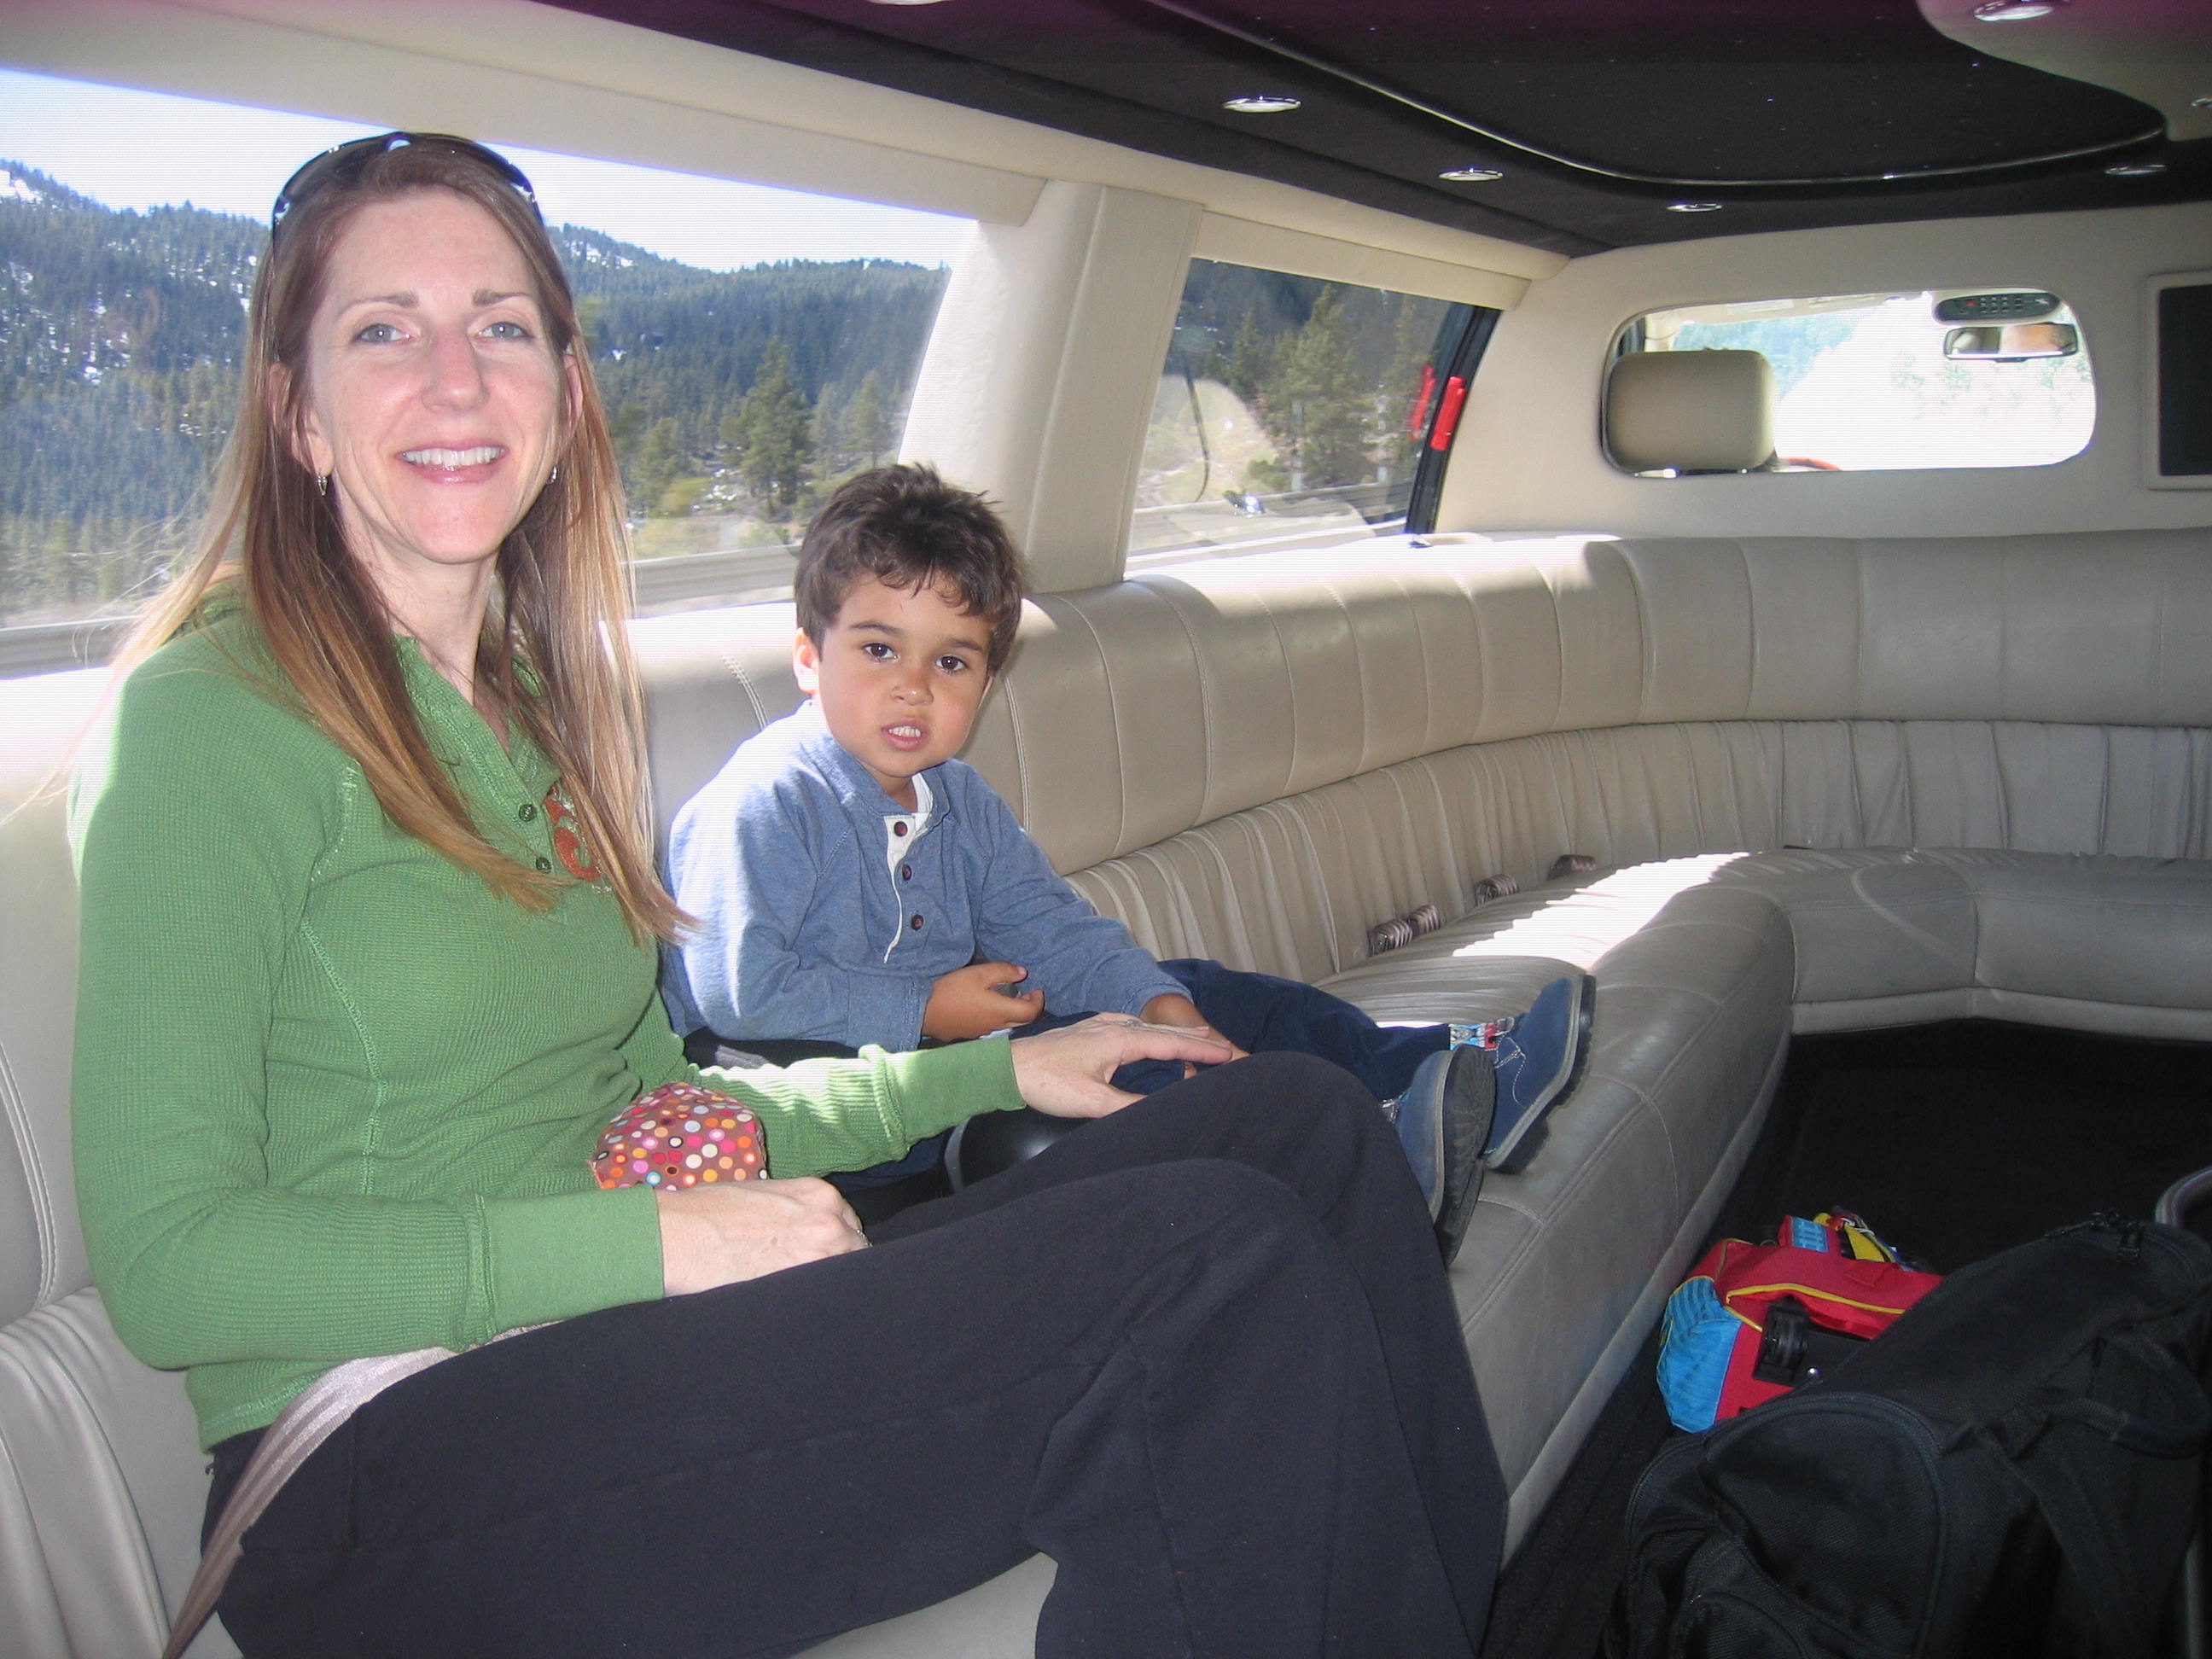 Richie Rich and his Mommy enjoy the hour long limo ride from the Reno airport up the mountain roads to Lake Tahoe.